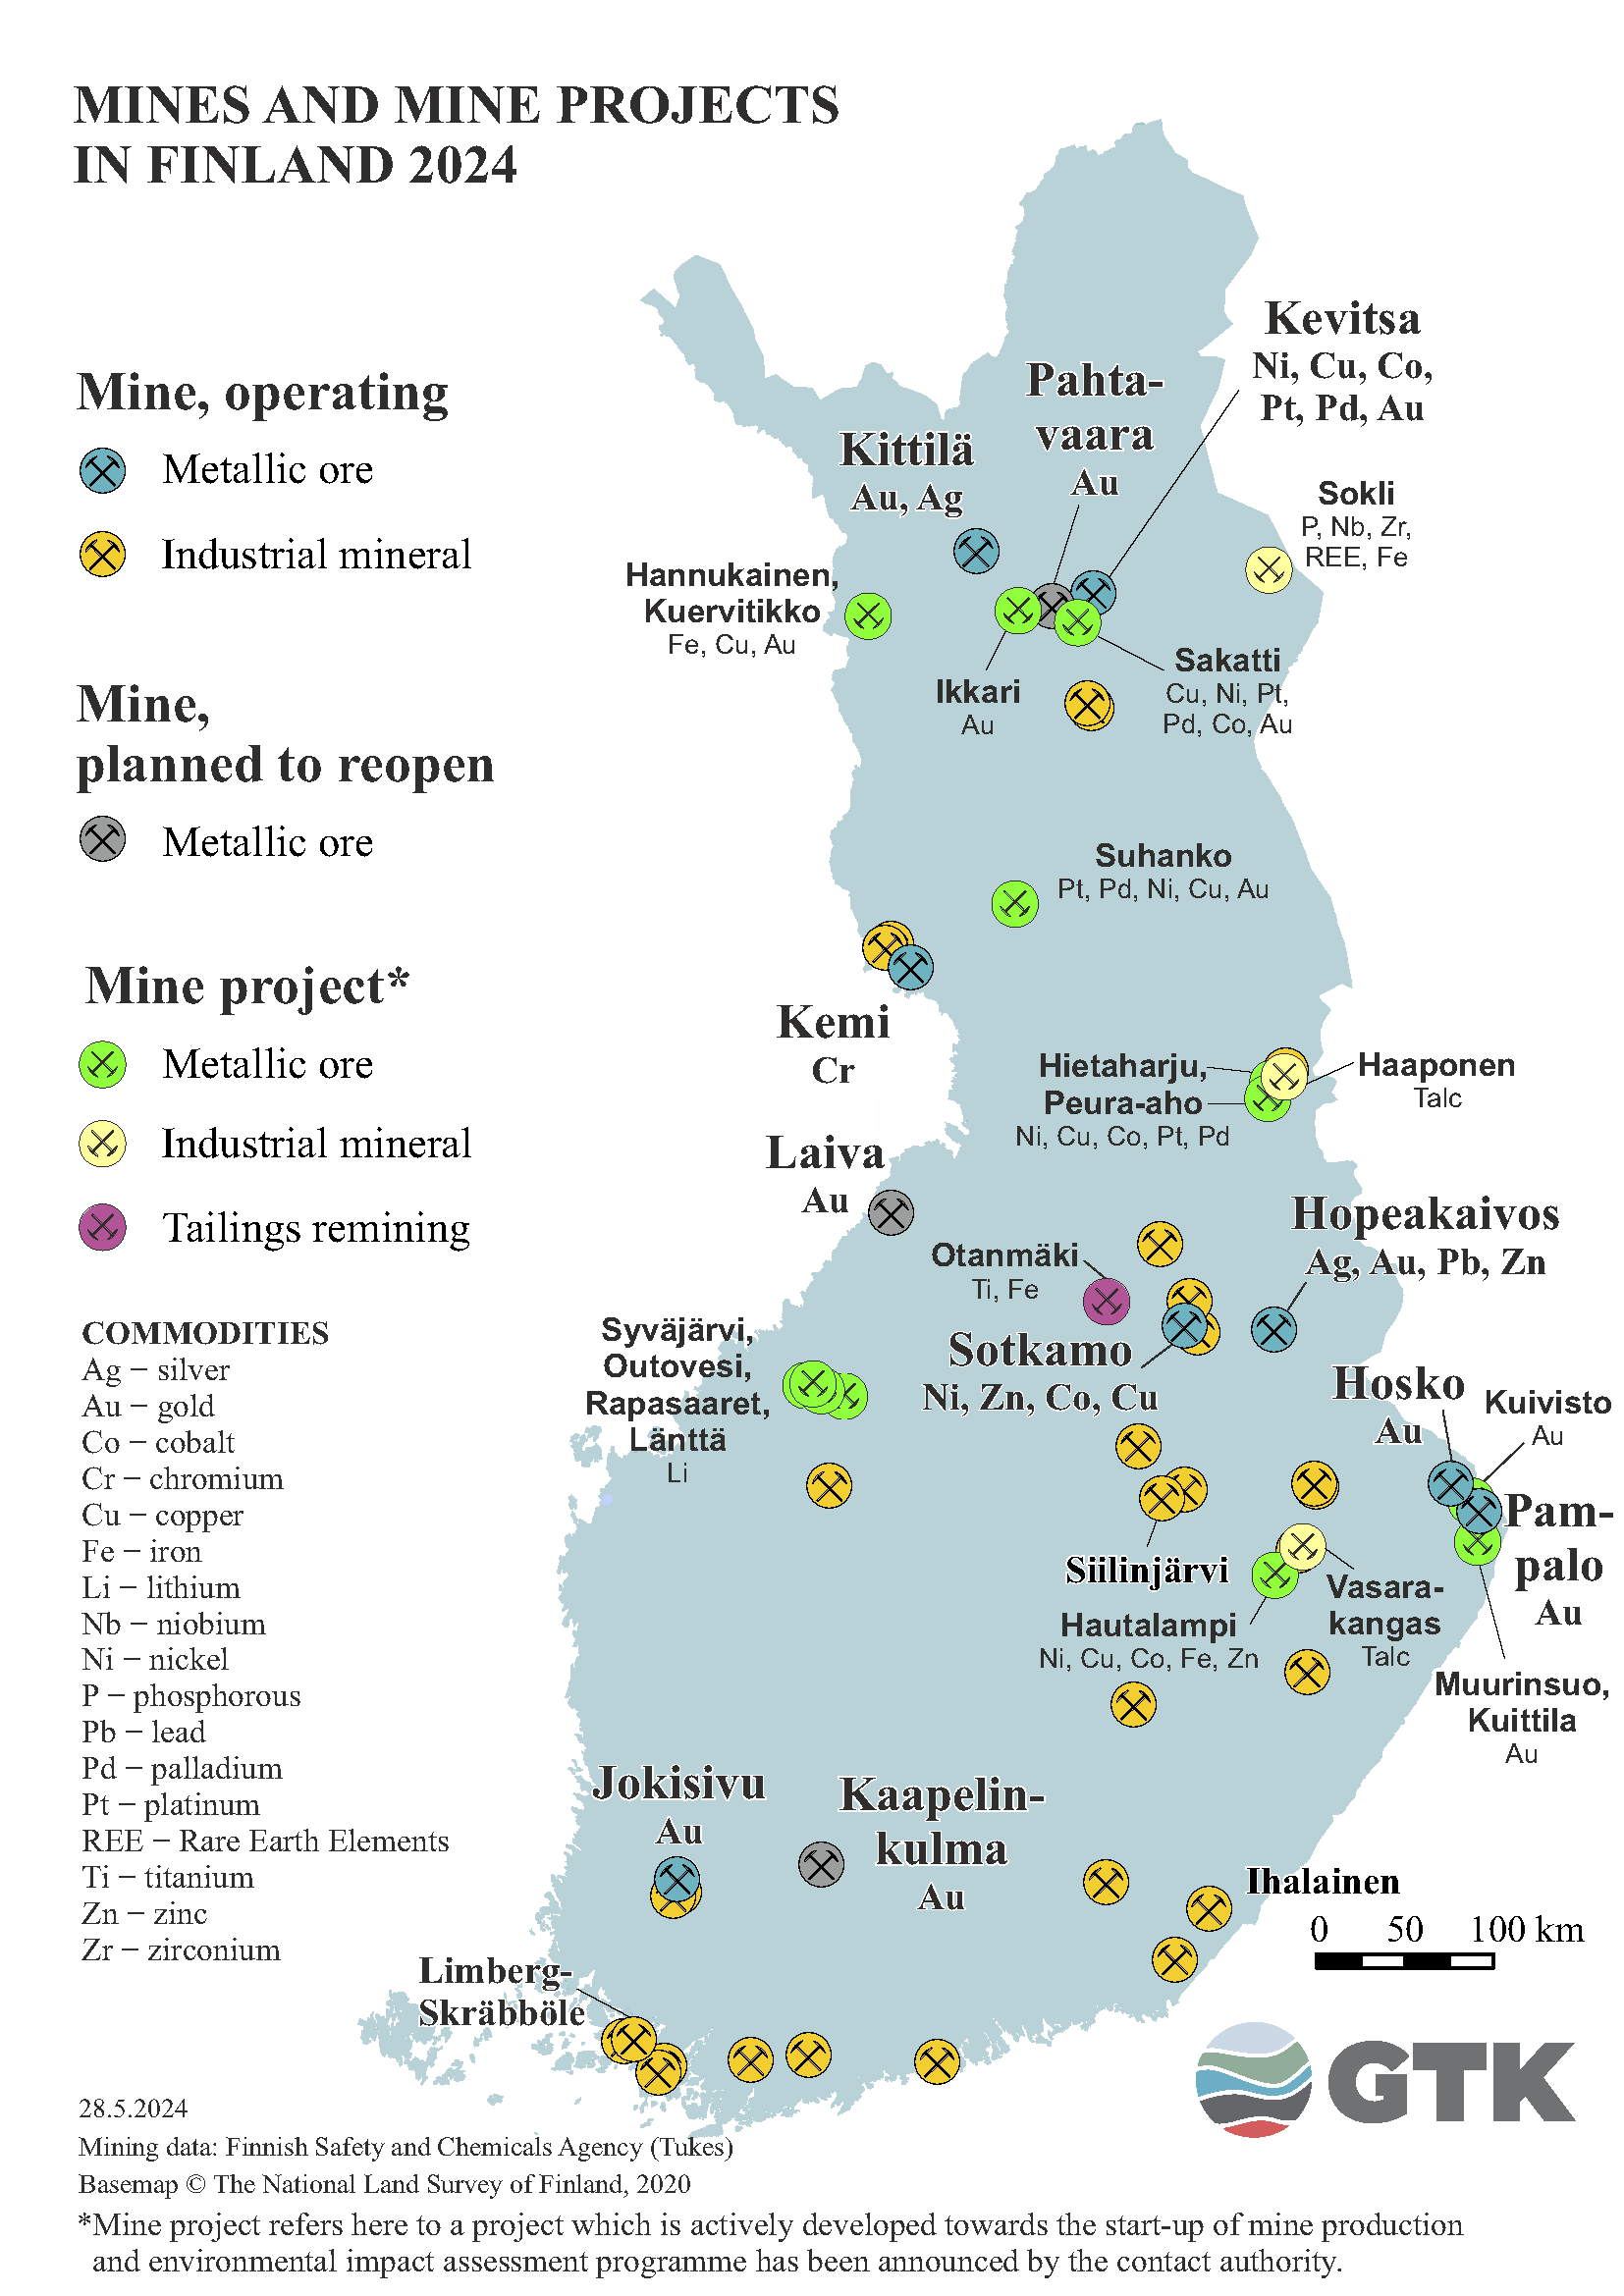 Mines and mine projects on the map of Finland